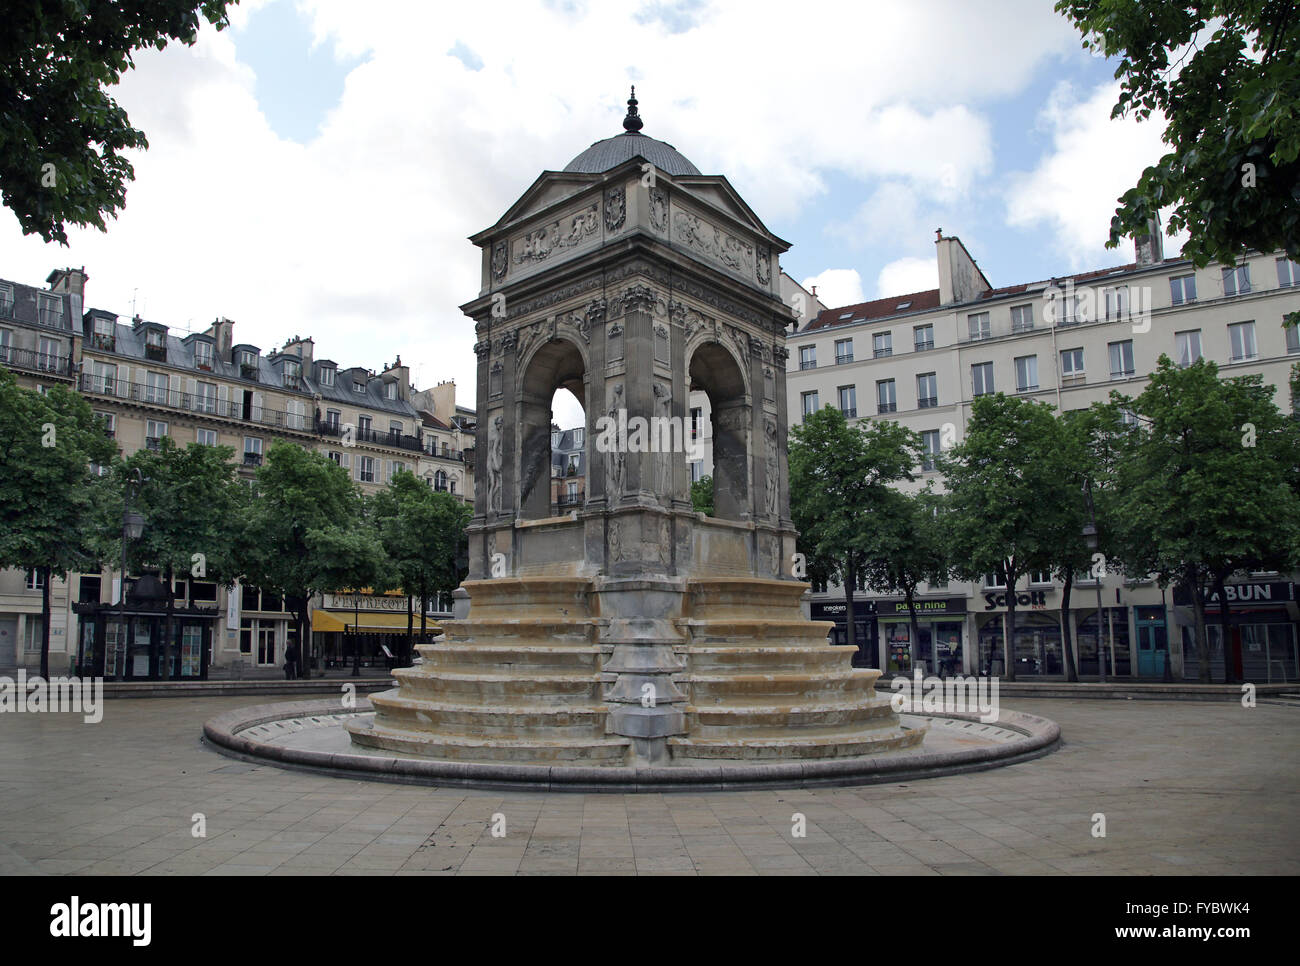 The Fontain of Innocents monumental public fountain on the place Joachim-du-Bellay in the Les Halles district of Paris France. Stock Photo